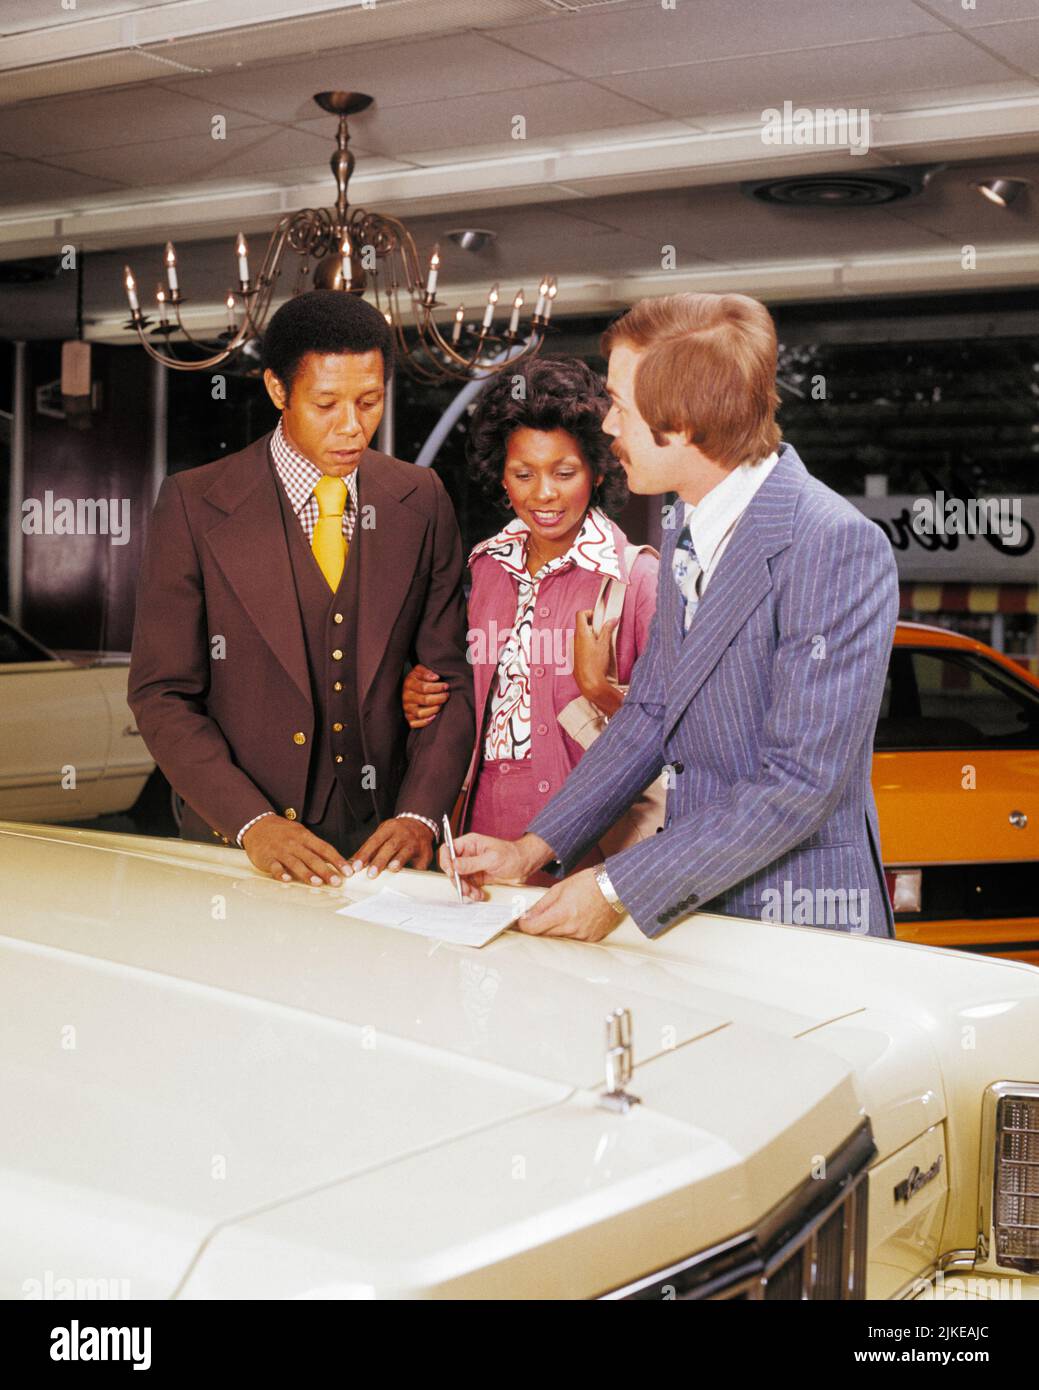 1970s AFRICAN AMERICAN COUPLE TALKING WITH CAUCASIAN NEW CAR SALESMAN IN AUTOMOBILE SHOWROOM - km4935 HAR001 HARS 1 STYLE WELCOME DIVERSE COMMUNICATION VEHICLE YOUNG ADULT TEAMWORK INFORMATION DIFFERENT SHOWROOM LIFESTYLE FEMALES MARRIED SPOUSE HUSBANDS LUXURY COPY SPACE FRIENDSHIP HALF-LENGTH LADIES PERSONS AUTOMOBILE MALES TRANSPORTATION VEST PARTNER FREEDOM GOALS SUIT AND TIE SELLING ADVENTURE STYLES CUSTOMER SERVICE AFRICAN-AMERICANS AFRICAN-AMERICAN AUTOS EXCITEMENT BLACK ETHNICITY OCCUPATIONS THREE PIECE SUIT CONCEPTUAL AUTOMOBILES INSPECTING STYLISH VARIOUS VEHICLES NEW CAR VARIED Stock Photo